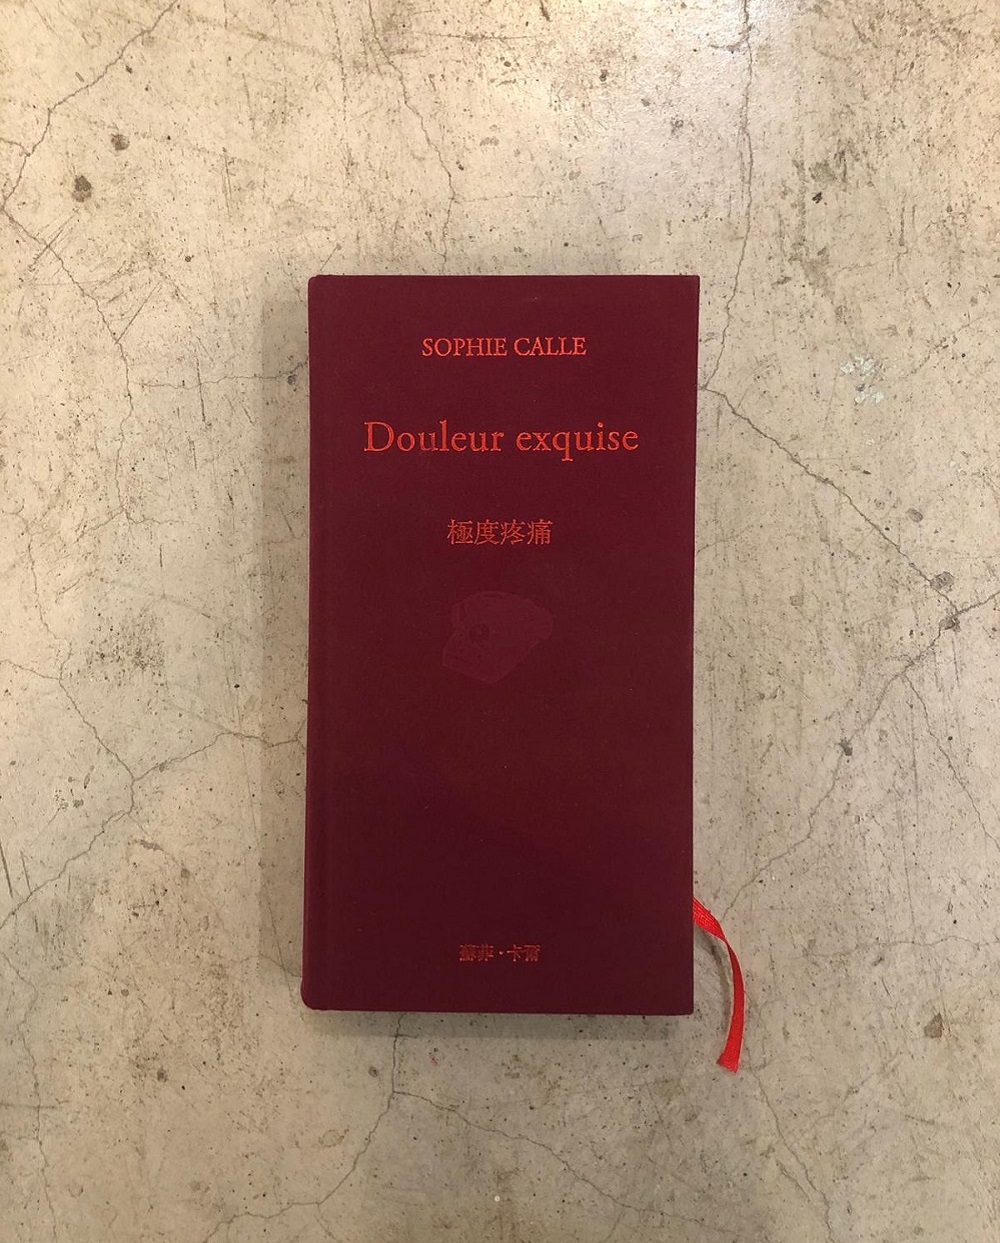 sophie calle douleur exquise 訳付き - アート/エンタメ